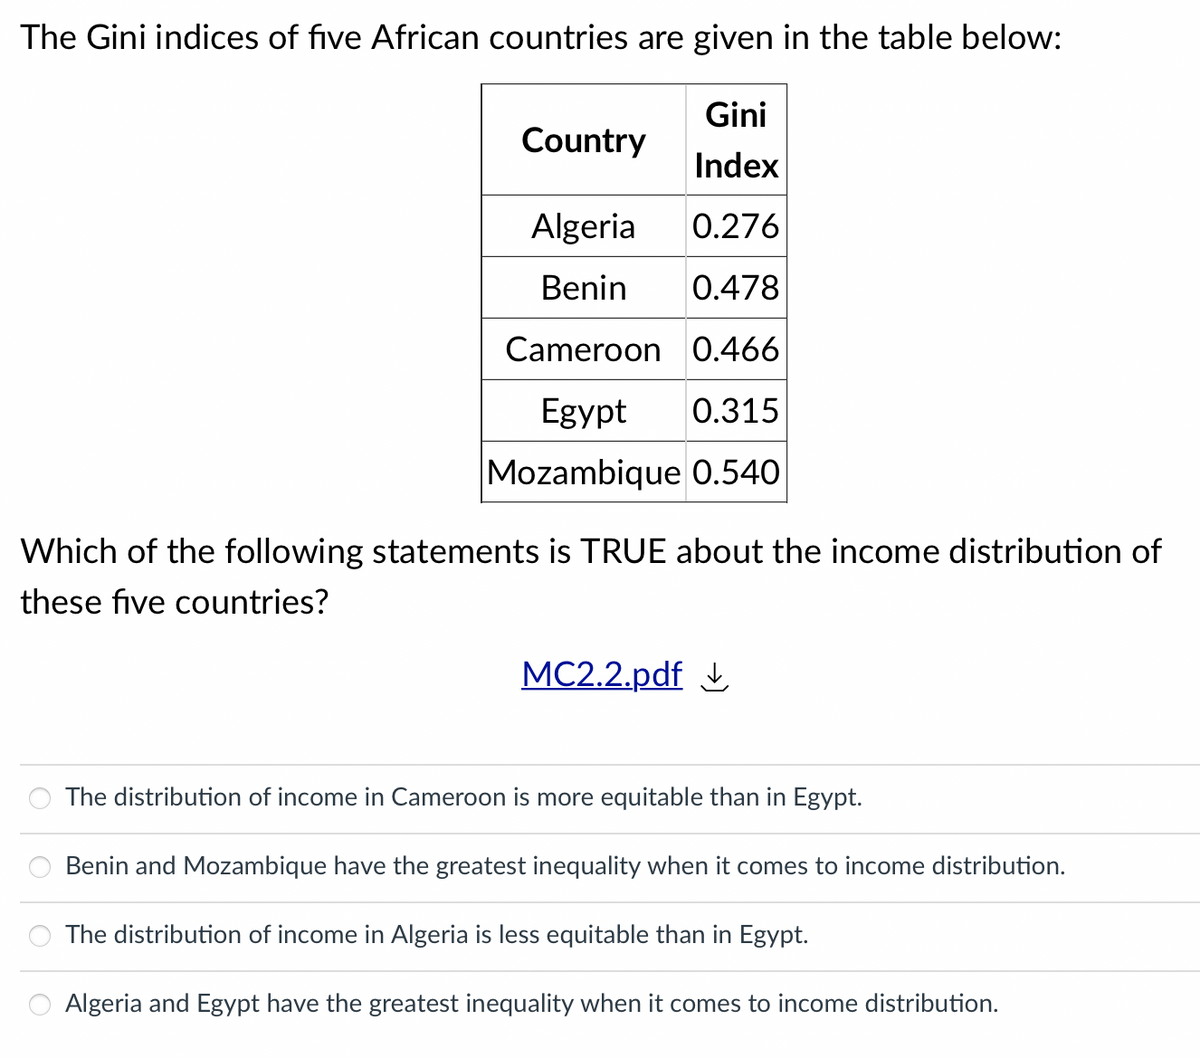 The Gini indices of five African countries are given in the table below:
Gini
Country
Index
Algeria
0.276
Benin
0.478
Cameroon 0.466
Egypt
0.315
Mozambique O.540
Which of the following statements is TRUE about the income distribution of
these five countries?
М2.2.pdf
The distribution of income in Cameroon is more equitable than in Egypt.
Benin and Mozambique have the greatest inequality when it comes to income distribution.
The distribution of income in Algeria is less equitable than in Egypt.
Algeria and Egypt have the greatest inequality when it comes to income distribution.
